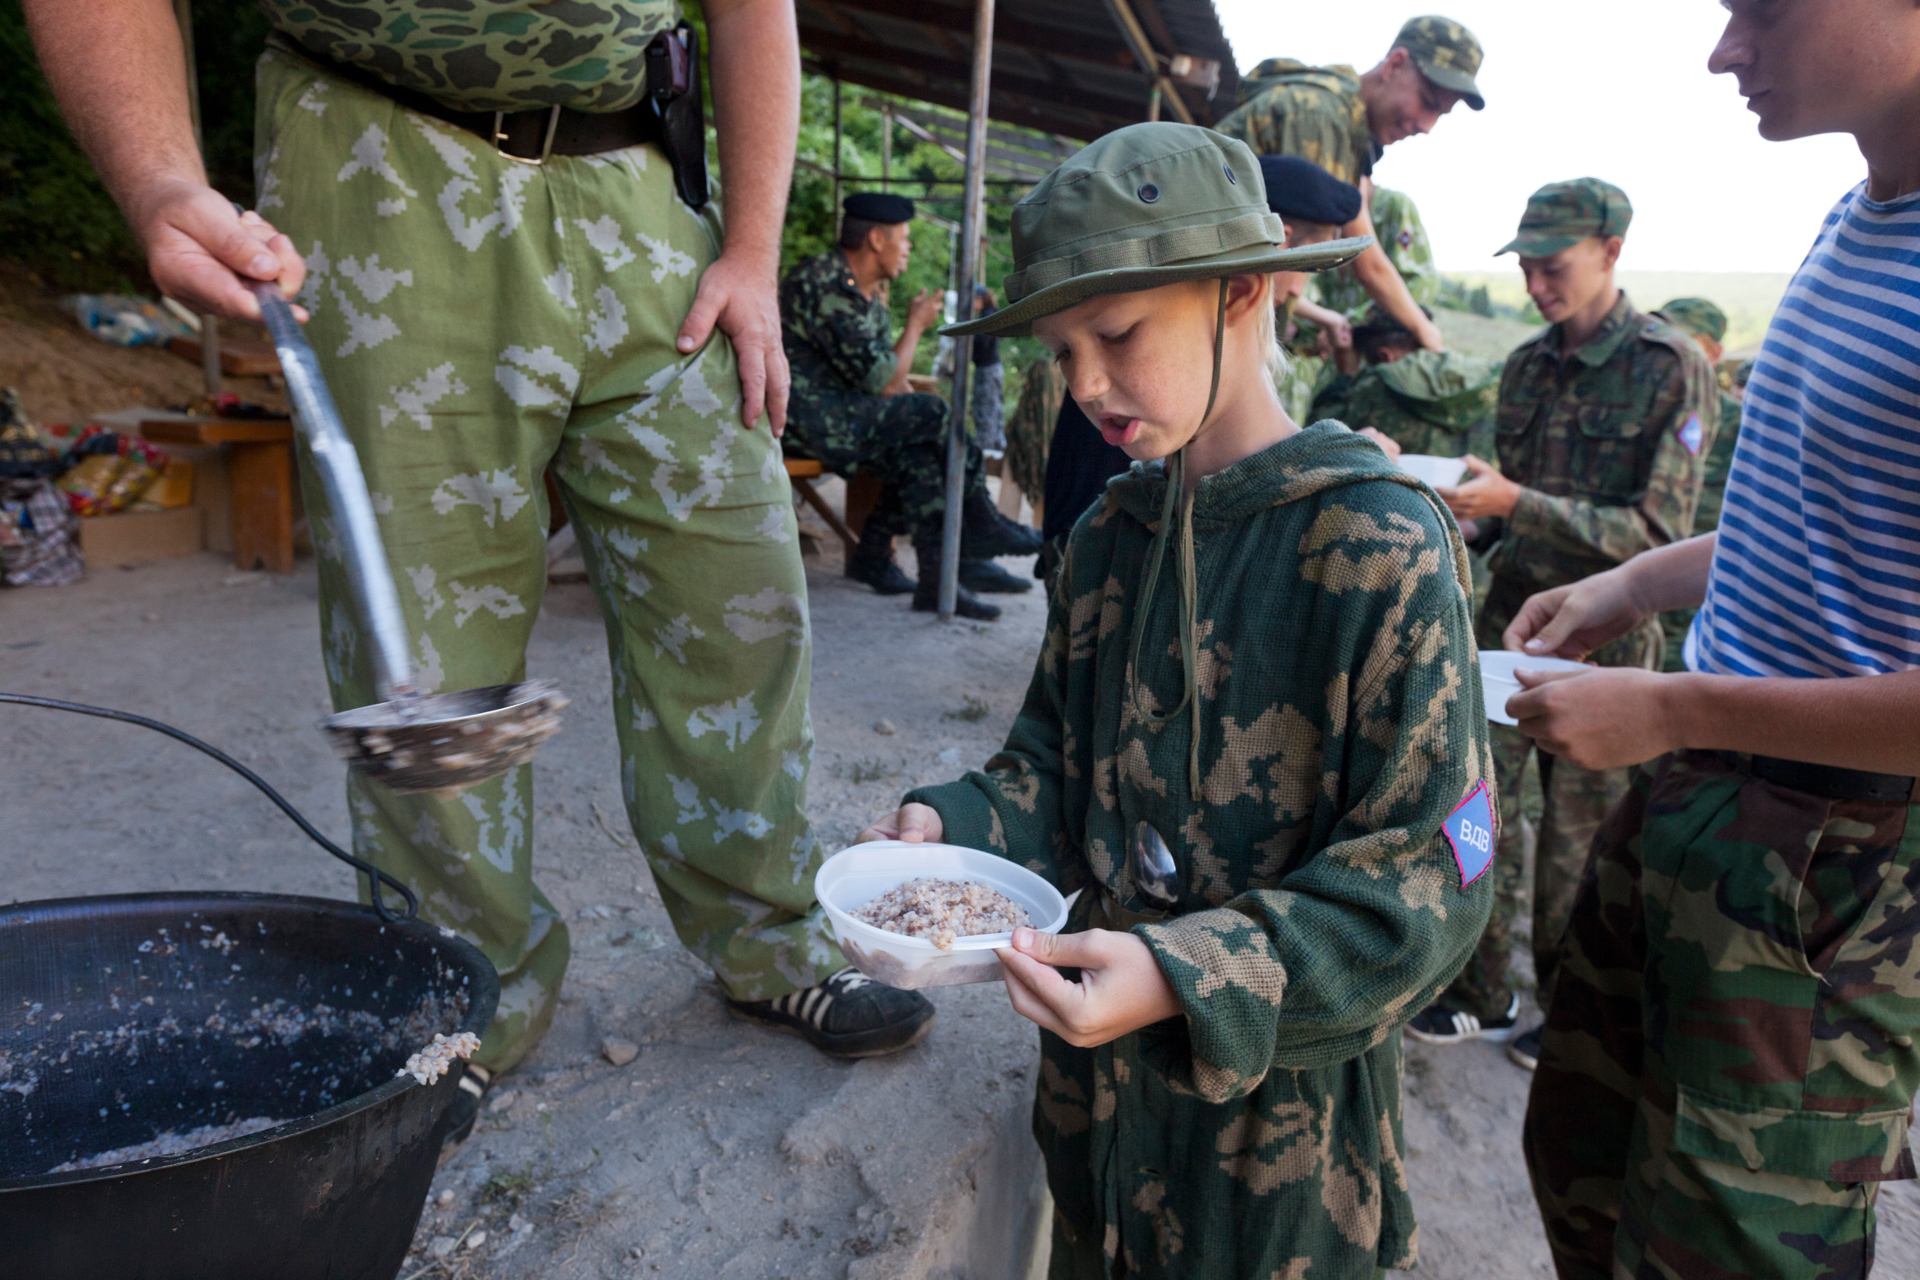  A young attendee frowns over the bland meal offered at the Cossack camp.  Eski-Kermen Region, Crimea  